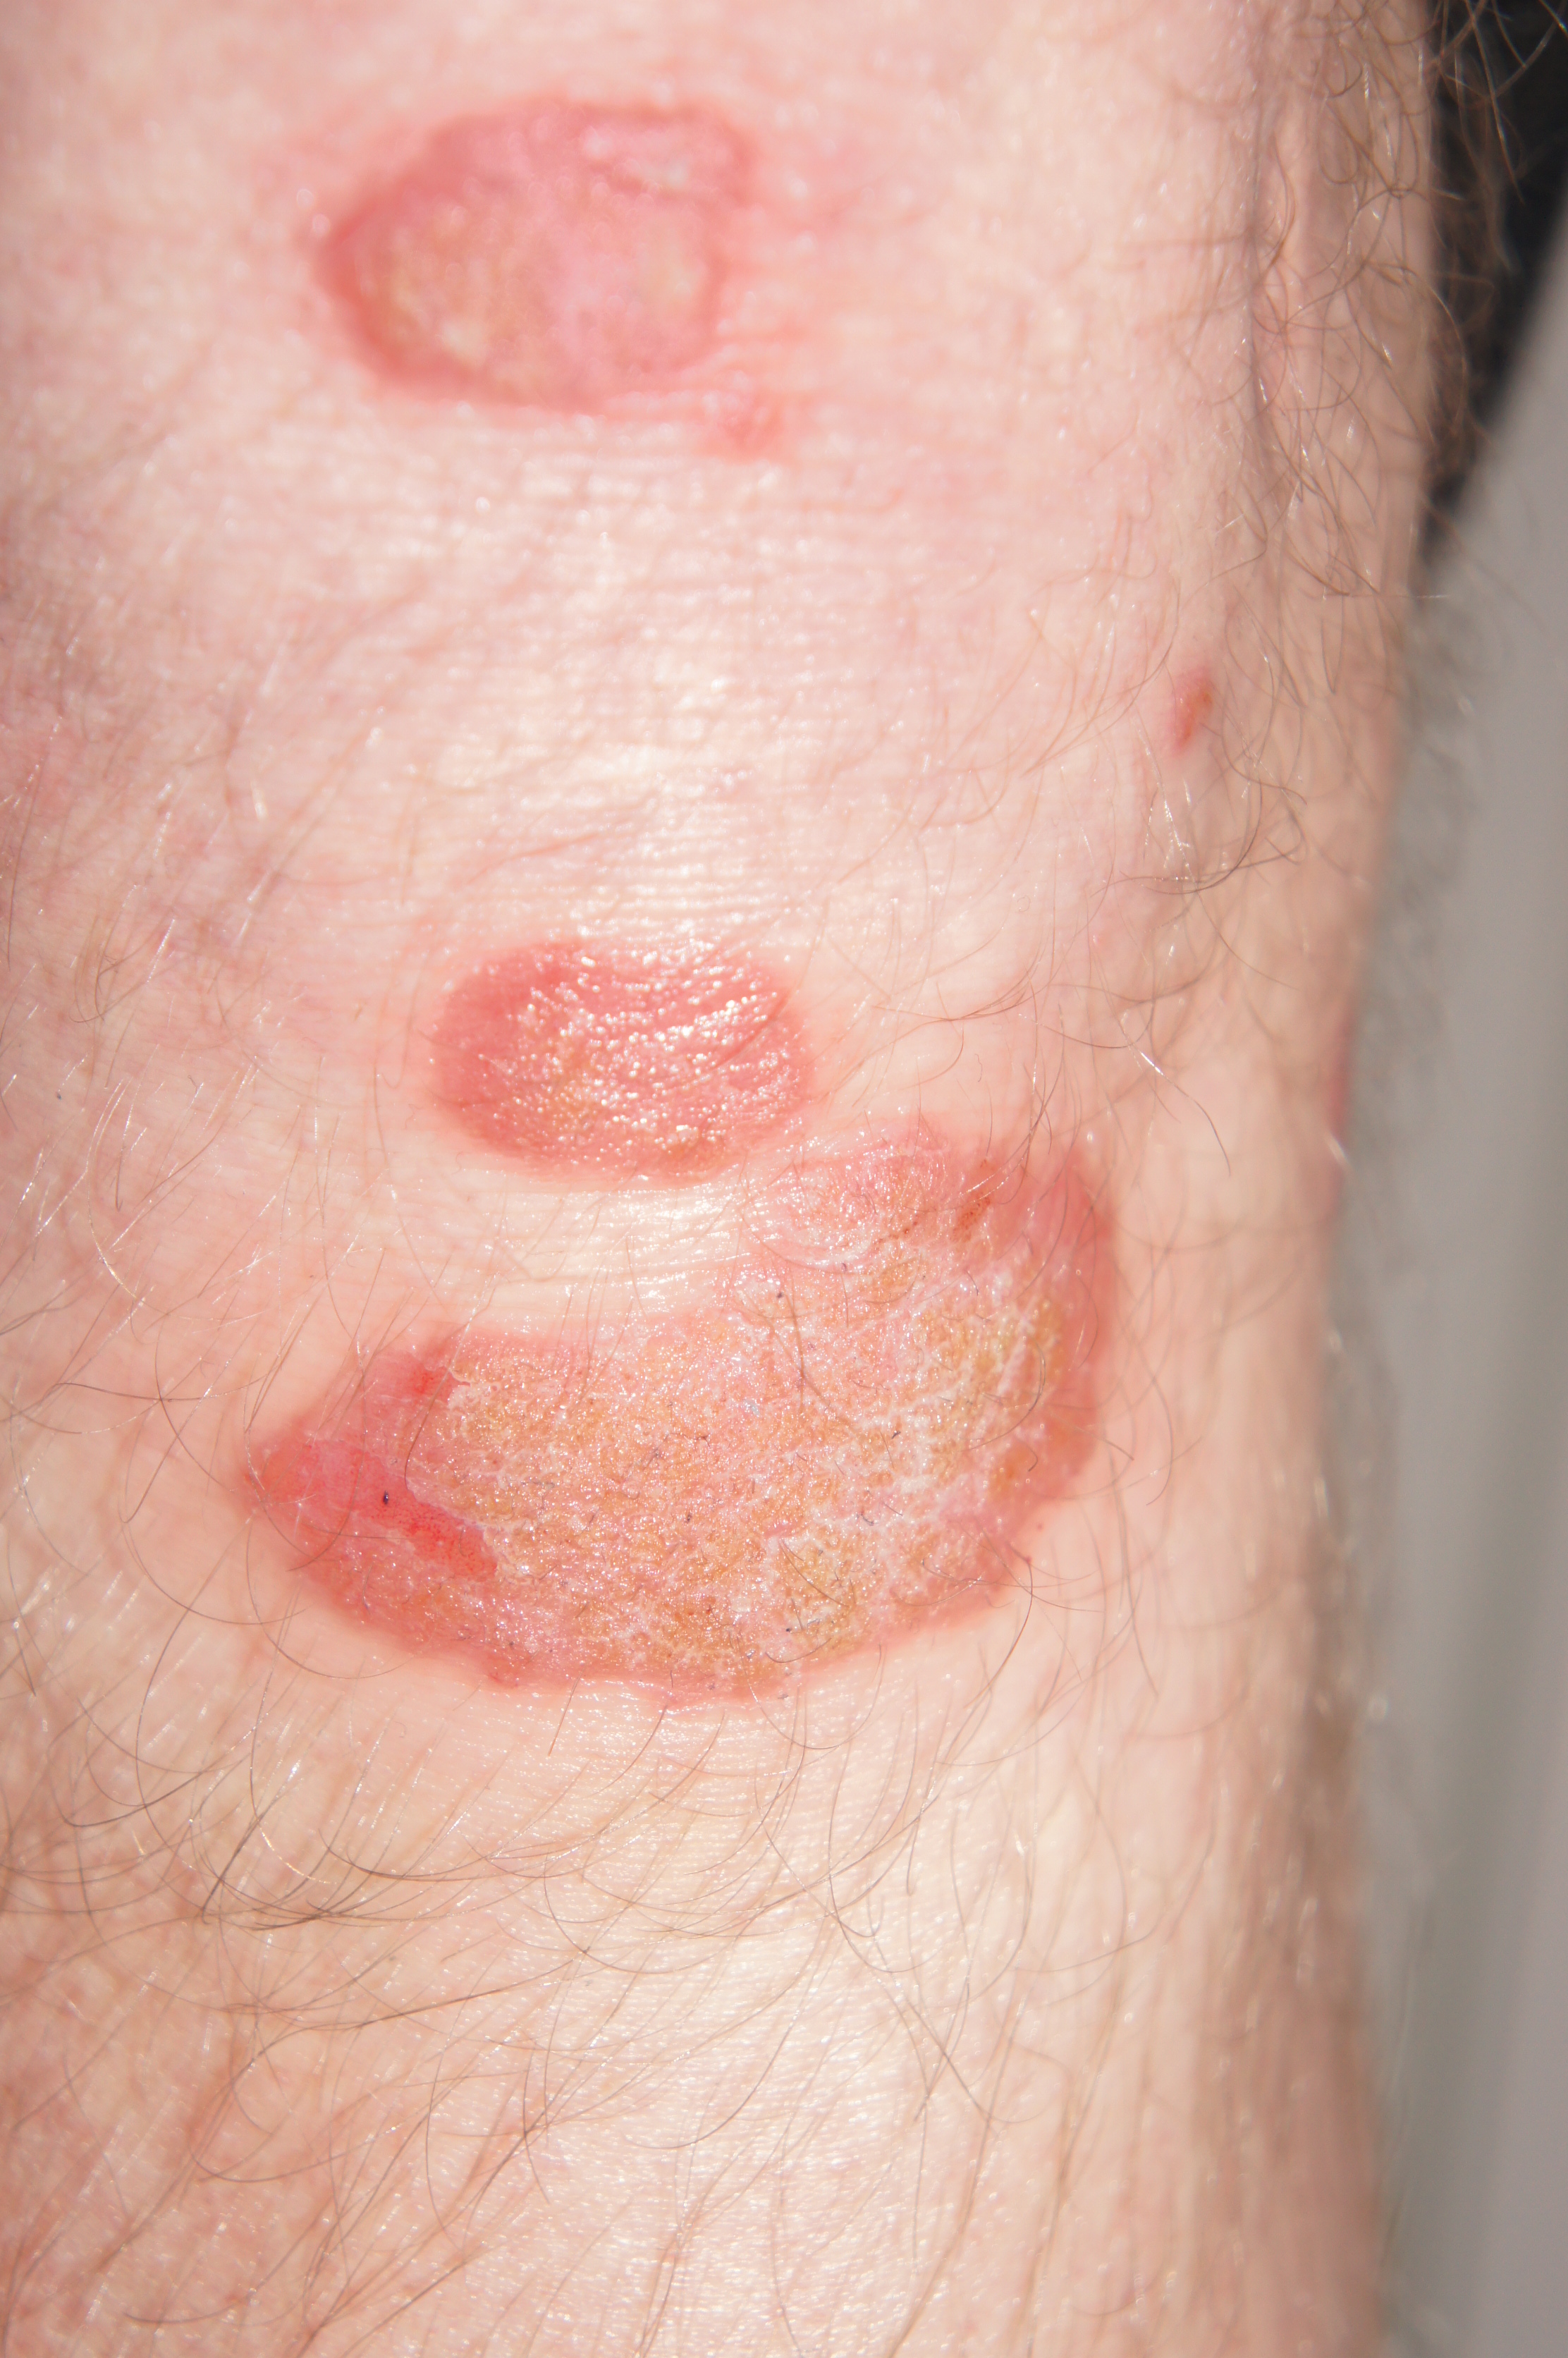 Psoriasis Pictures - View Free Images of Psoriasis